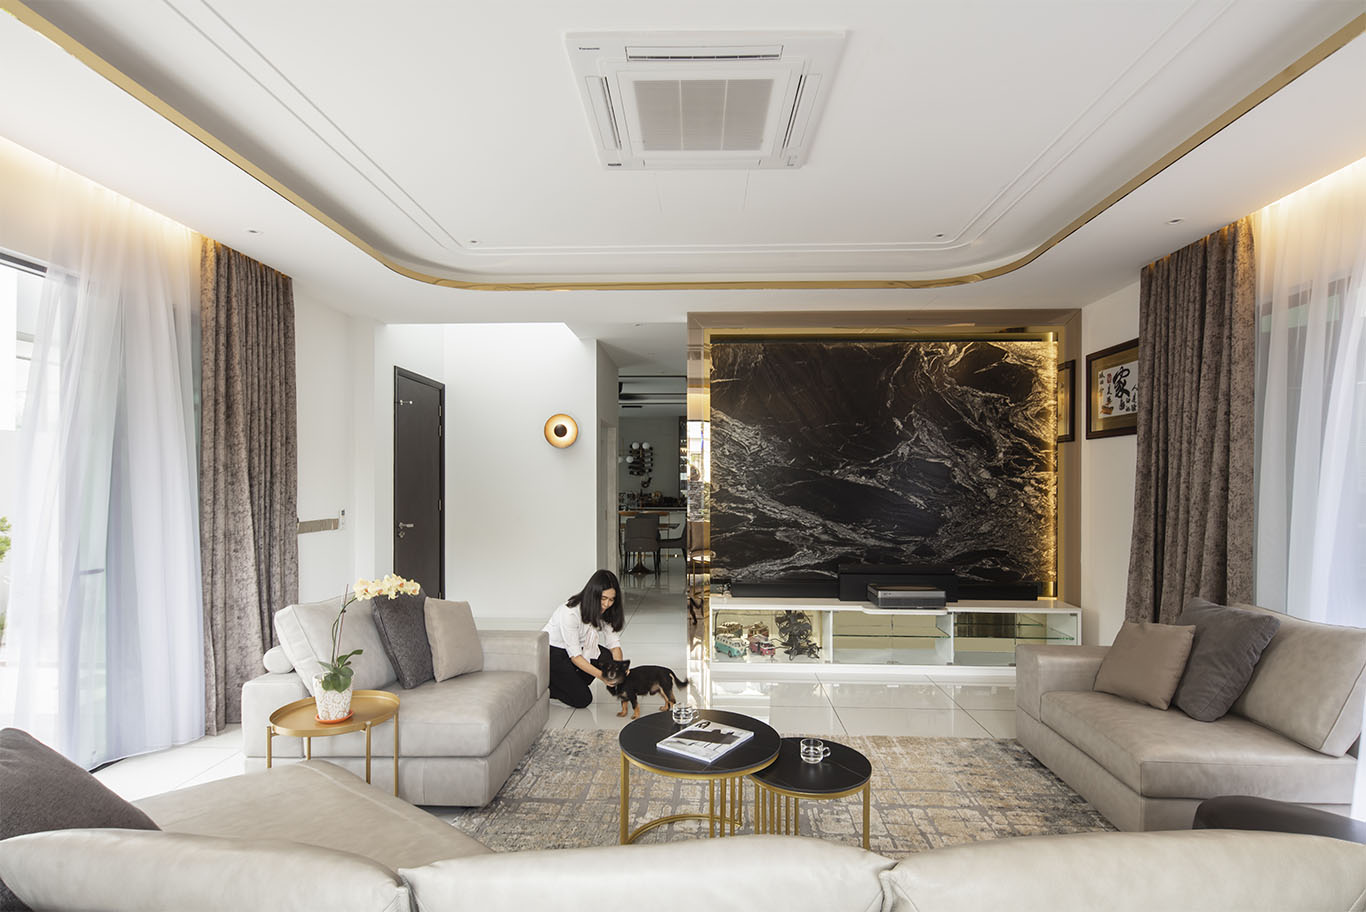 MIEUX La Famillie De Lee luxury living room with black marble wall and ceiling aircon 2 mieux interior design